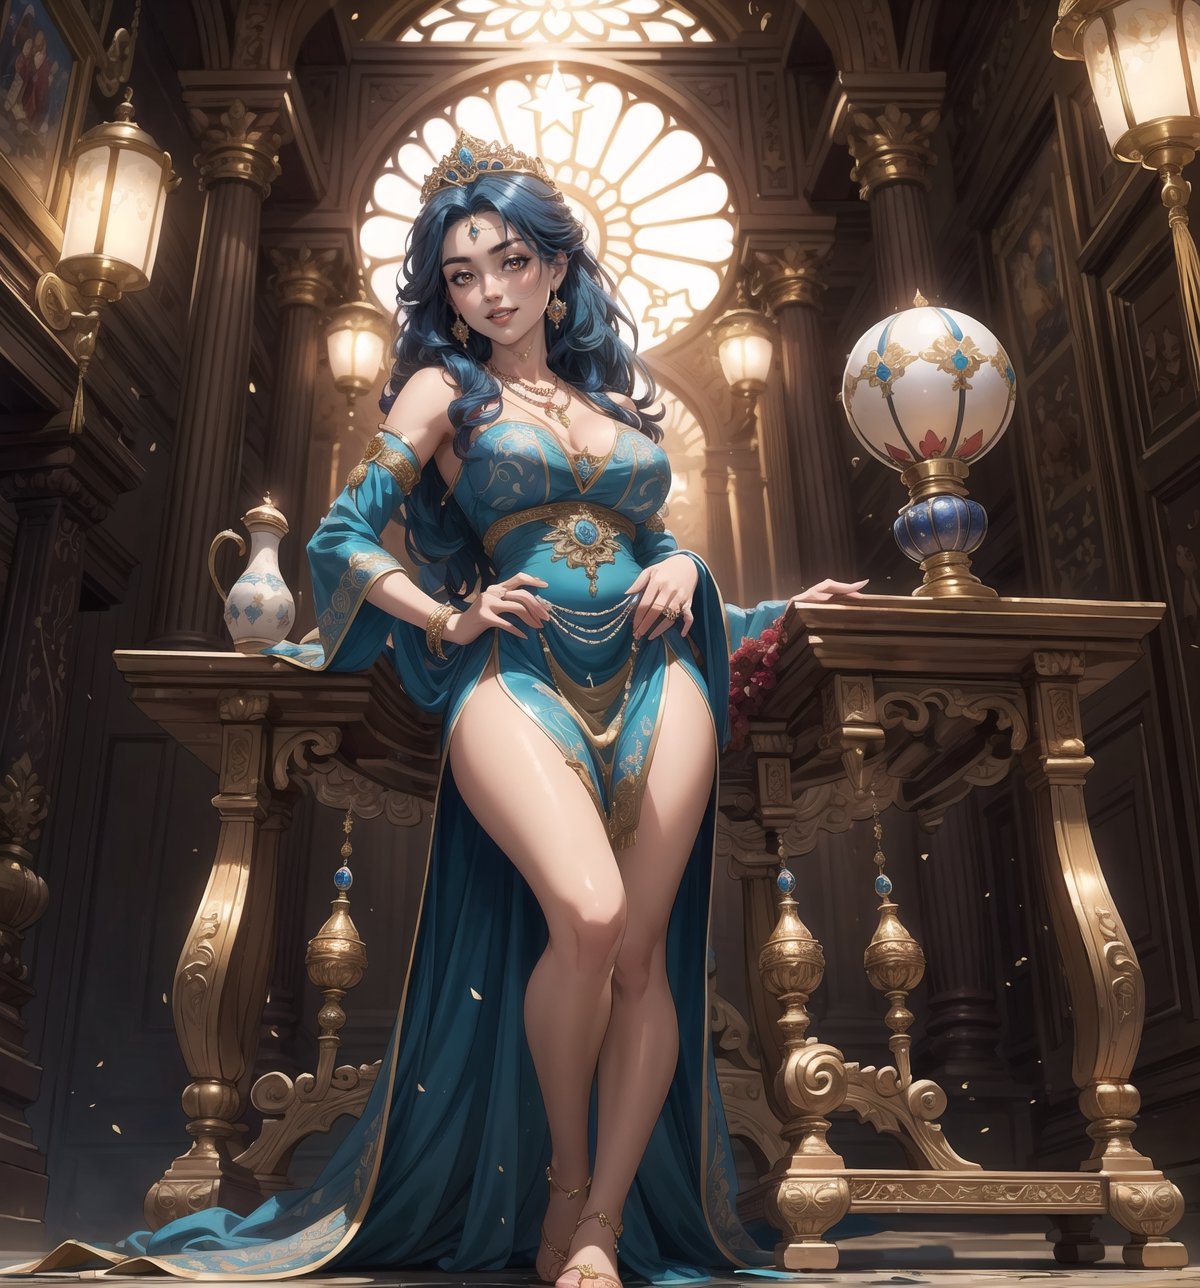 Image in 4K ultra-sharp with a Persian, Arabic, and Oriental style, combining religious elements and opulence. | A 29-year-old woman with long and straight blue hair, dressed in a Persian princess outfit, is standing inside a Persian temple. The outfit consists of a long and flowing dress in shades of blue and gold, with embroidery and precious stone details. She is also wearing a gold tiara with precious stones, a necklace with a star-shaped pendant, and gold bracelets. Her red eyes shine with happiness, and her mouth opens in a radiant smile, showing her white and well-aligned teeth, while her cheeks are flushed. | The composition of the image is in a wide-angle shot, emphasizing the woman's figure and the architectural elements of the temple. The stone walls, columns, statues, wooden gates, tables, metal candelabras, lamps, and stone altar, all over half a meter high, create a majestic and sacred environment. The natural lighting that enters through the high windows highlights the details of the scene. | Soft and warm lighting effects create a welcoming and mystical atmosphere, while detailed textures on the structures and the outfit add realism to the image. The intense shine of the woman's blue hair and the shine of the precious stones on the outfit and the tiara are highlighted by the rays of light that enter the scene. | A happy and enchanting scene of a woman dressed as a Persian princess inside a majestic temple, combining religious elements and opulence. | (((((The image reveals a full-body_shot as she assumes a joyful_pose, engagingly interacting with the structures within the scene in an exciting manner. She takes on a relaxed_pose as she interacts, boldly leaning on a structure, leaning back in an exciting way))))) | ((perfect_anatomy, perfect_body, perfect_pose)), ((full-body_shot)), ((perfect fingers, better hands, perfect hands):1.5), ((perfect legs, perfect feet):1.5), ((perfect design)), ((correct errors):1.5), ((perfect composition)), ((very detailed scene, very detailed background, correct imperfections, perfect layout):1.2), ((More Detail, Enhance))